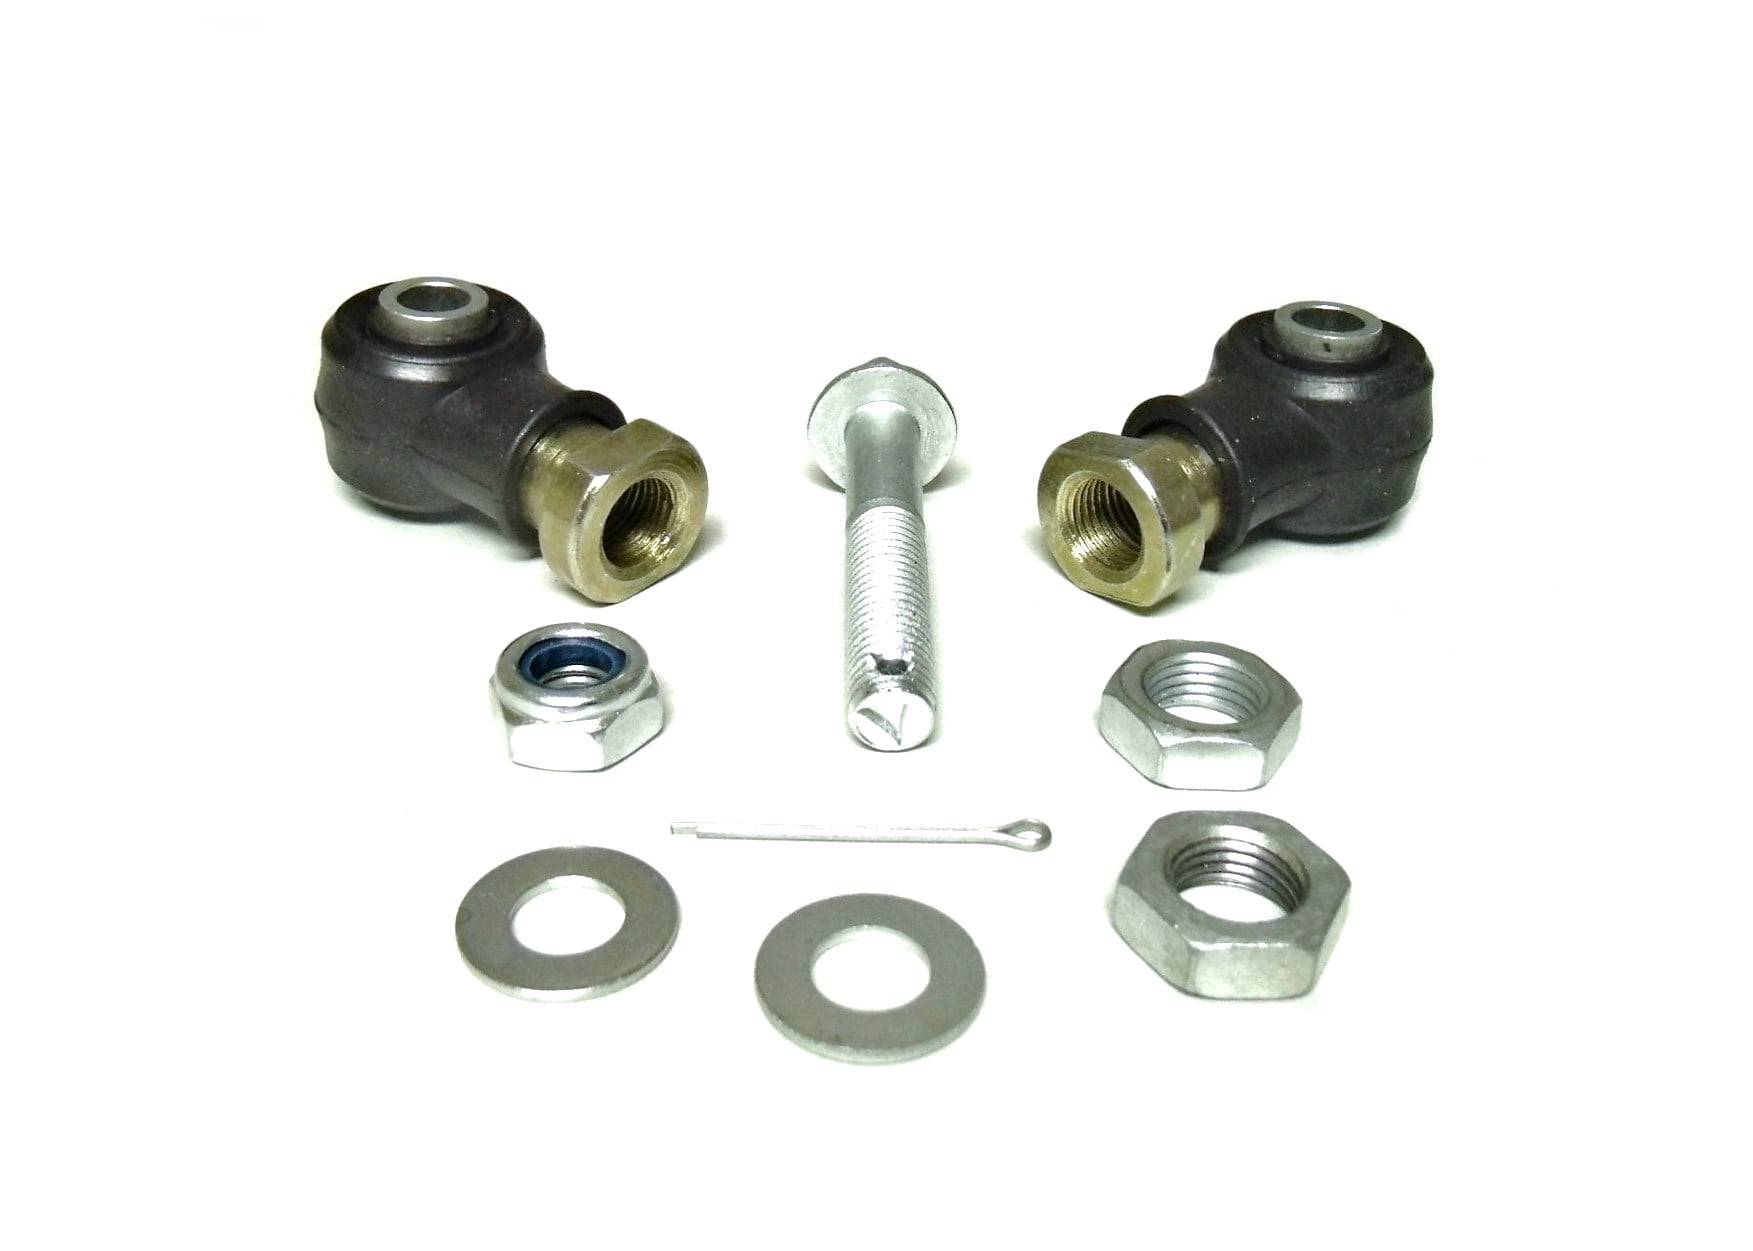 Tusk Tie Rod Ends For POLARIS Outlaw 500 2006-2007 